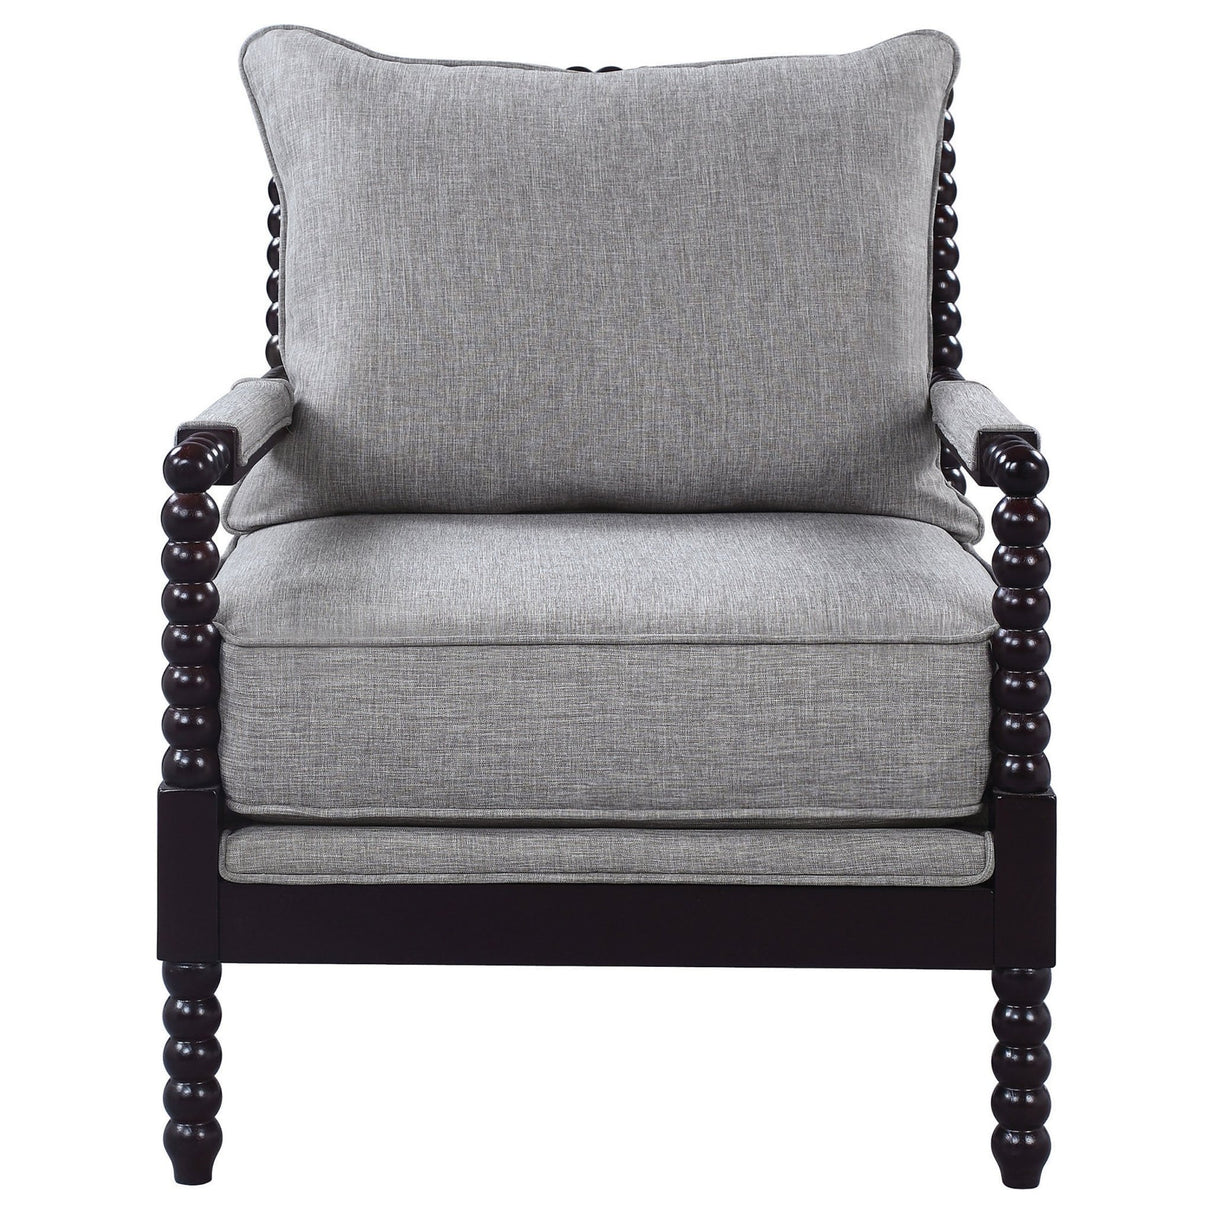 Accent Chair - Blanchett Cushion Back Accent Chair Grey and Black - Accent Chairs - 903824 - image - 3